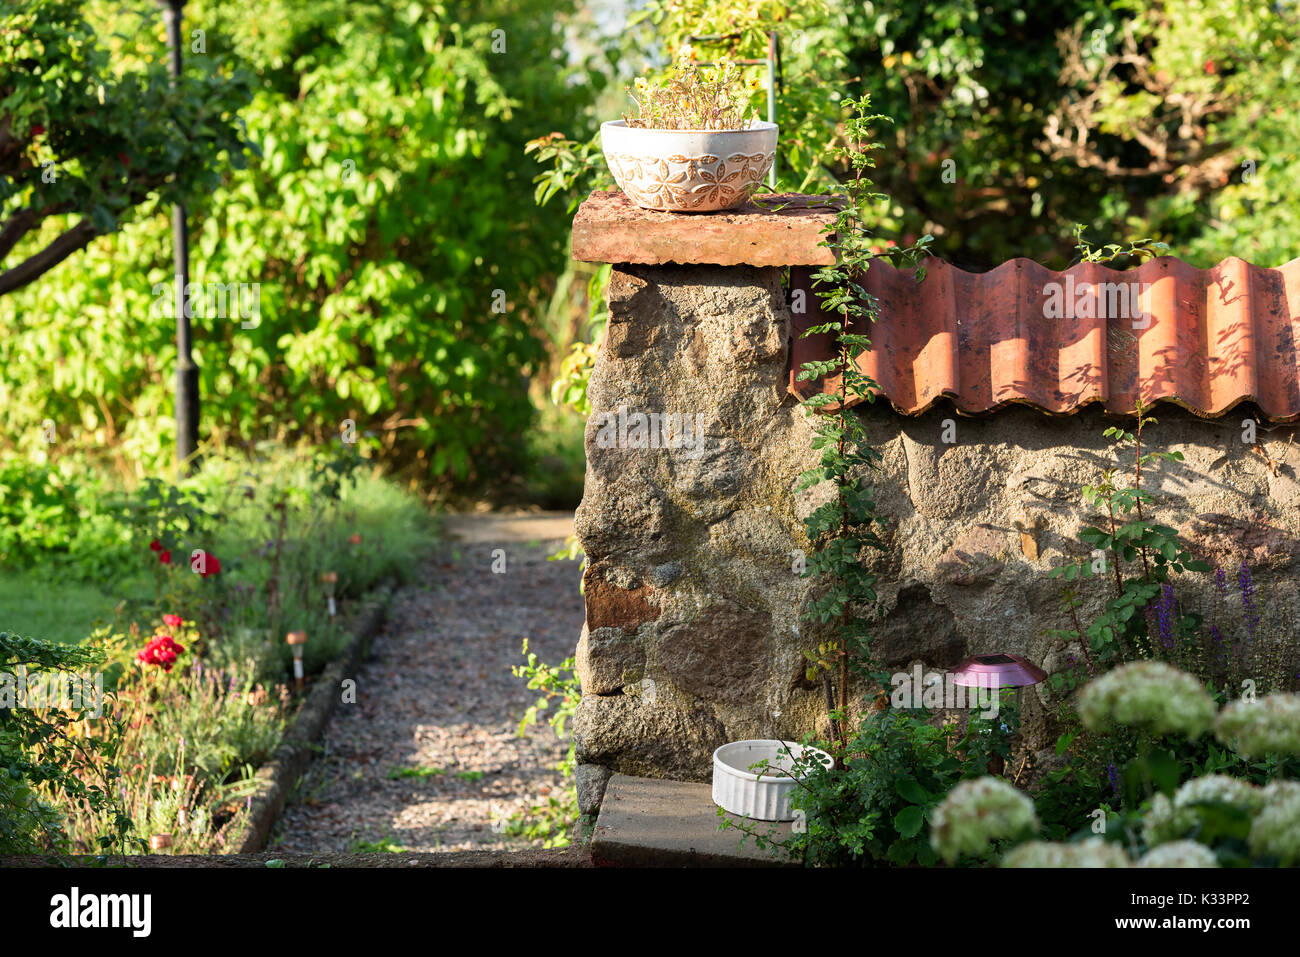 Corner of stone wall with flowerpot on top and a gravel garden path beside. Wall has roof tiles on top. Stock Photo